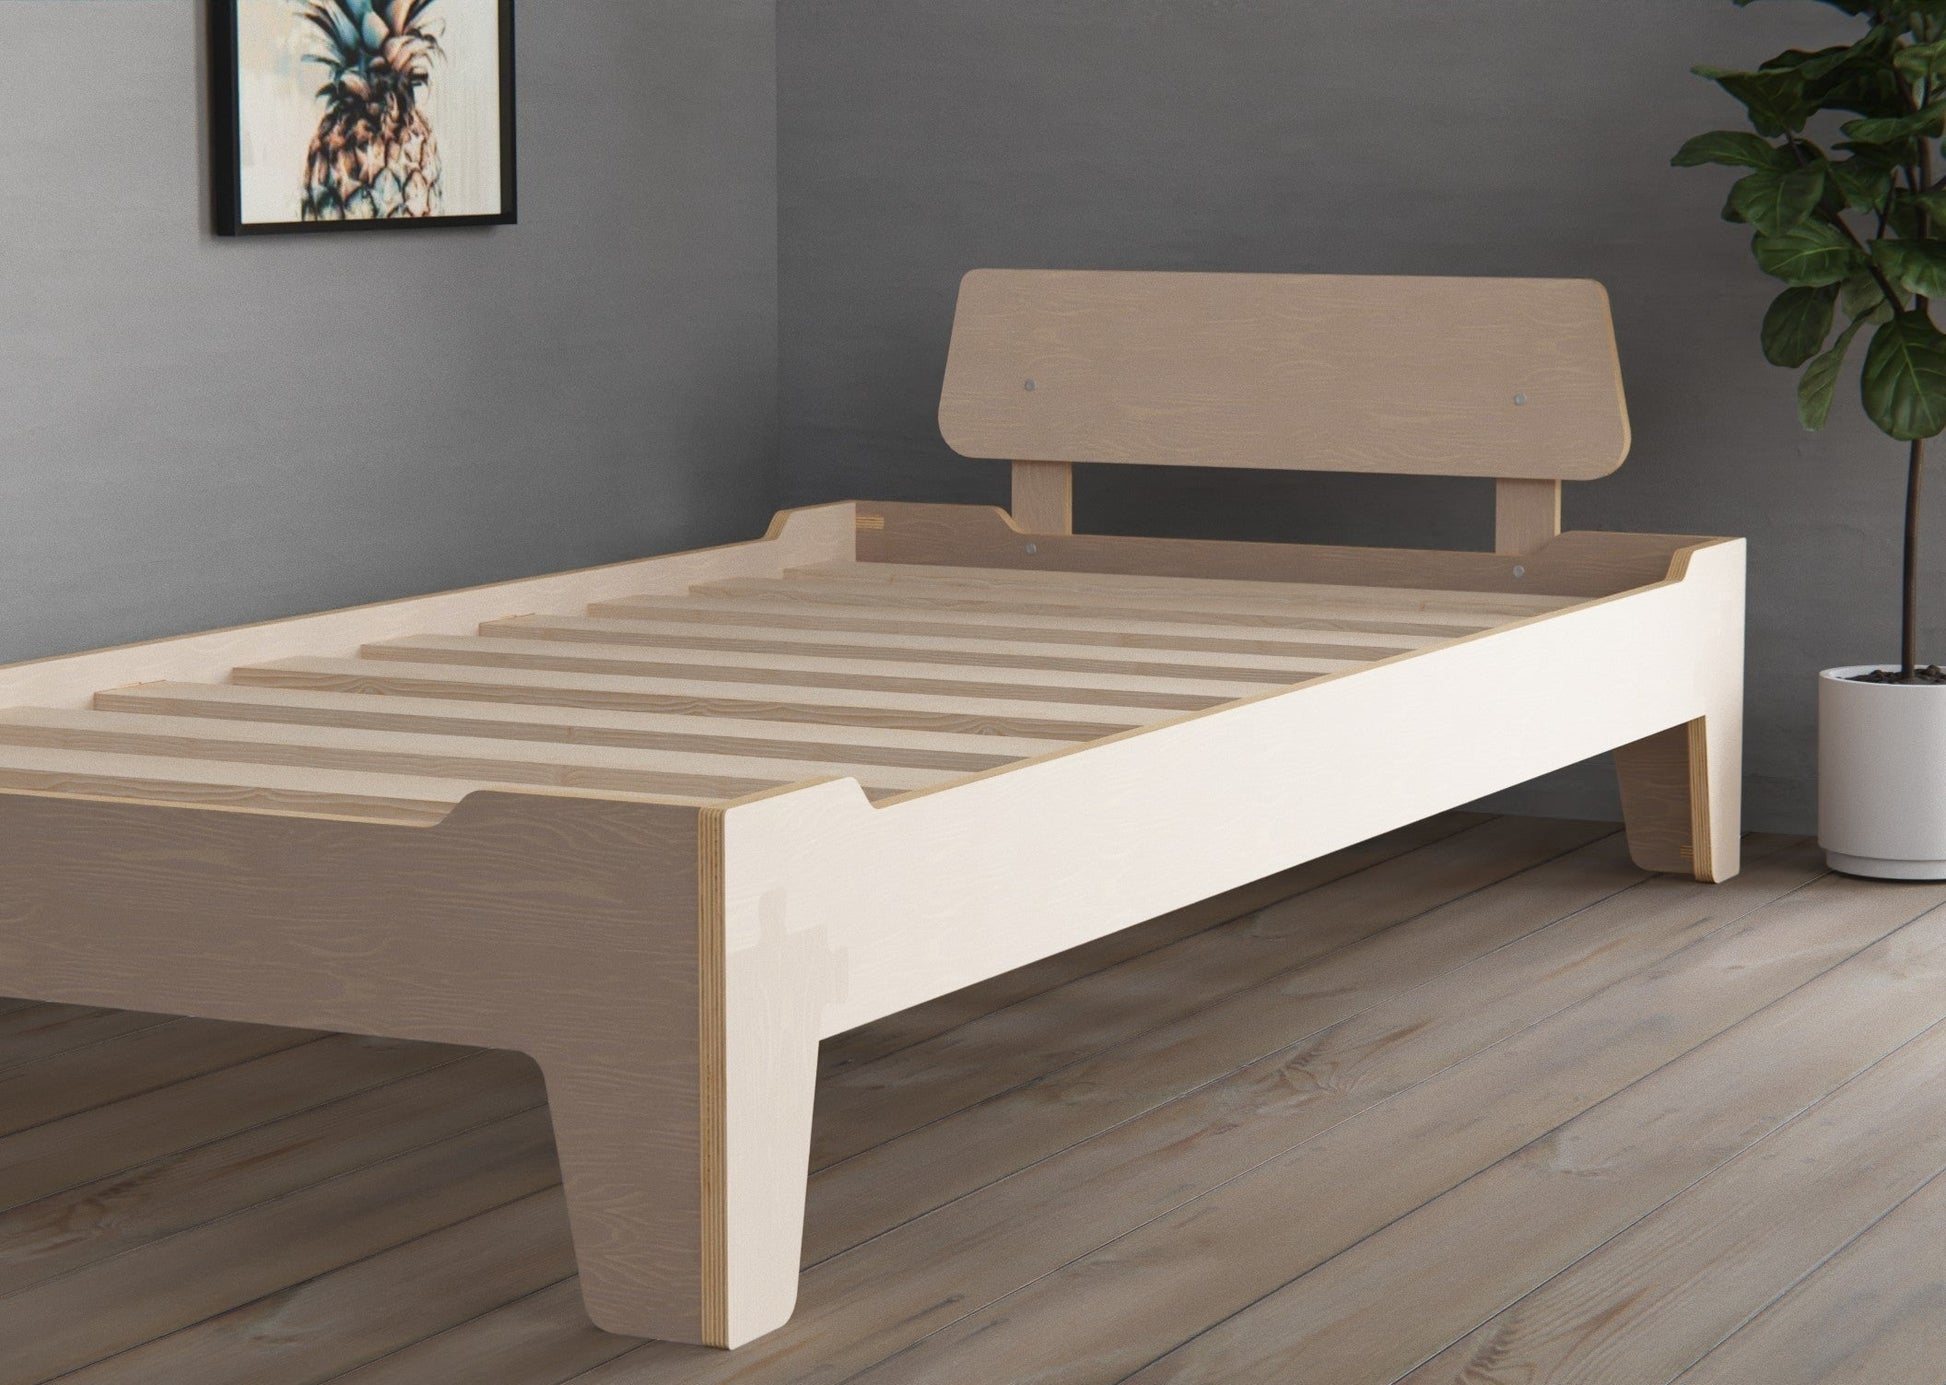 Introducing our flippable kids bed frame, carefully crafted based on Montessori principles. Start low for easy toddler access, flip it to a regular floor bed for teenagers and adults. Customize with an optional spacious drawer for extra storage.